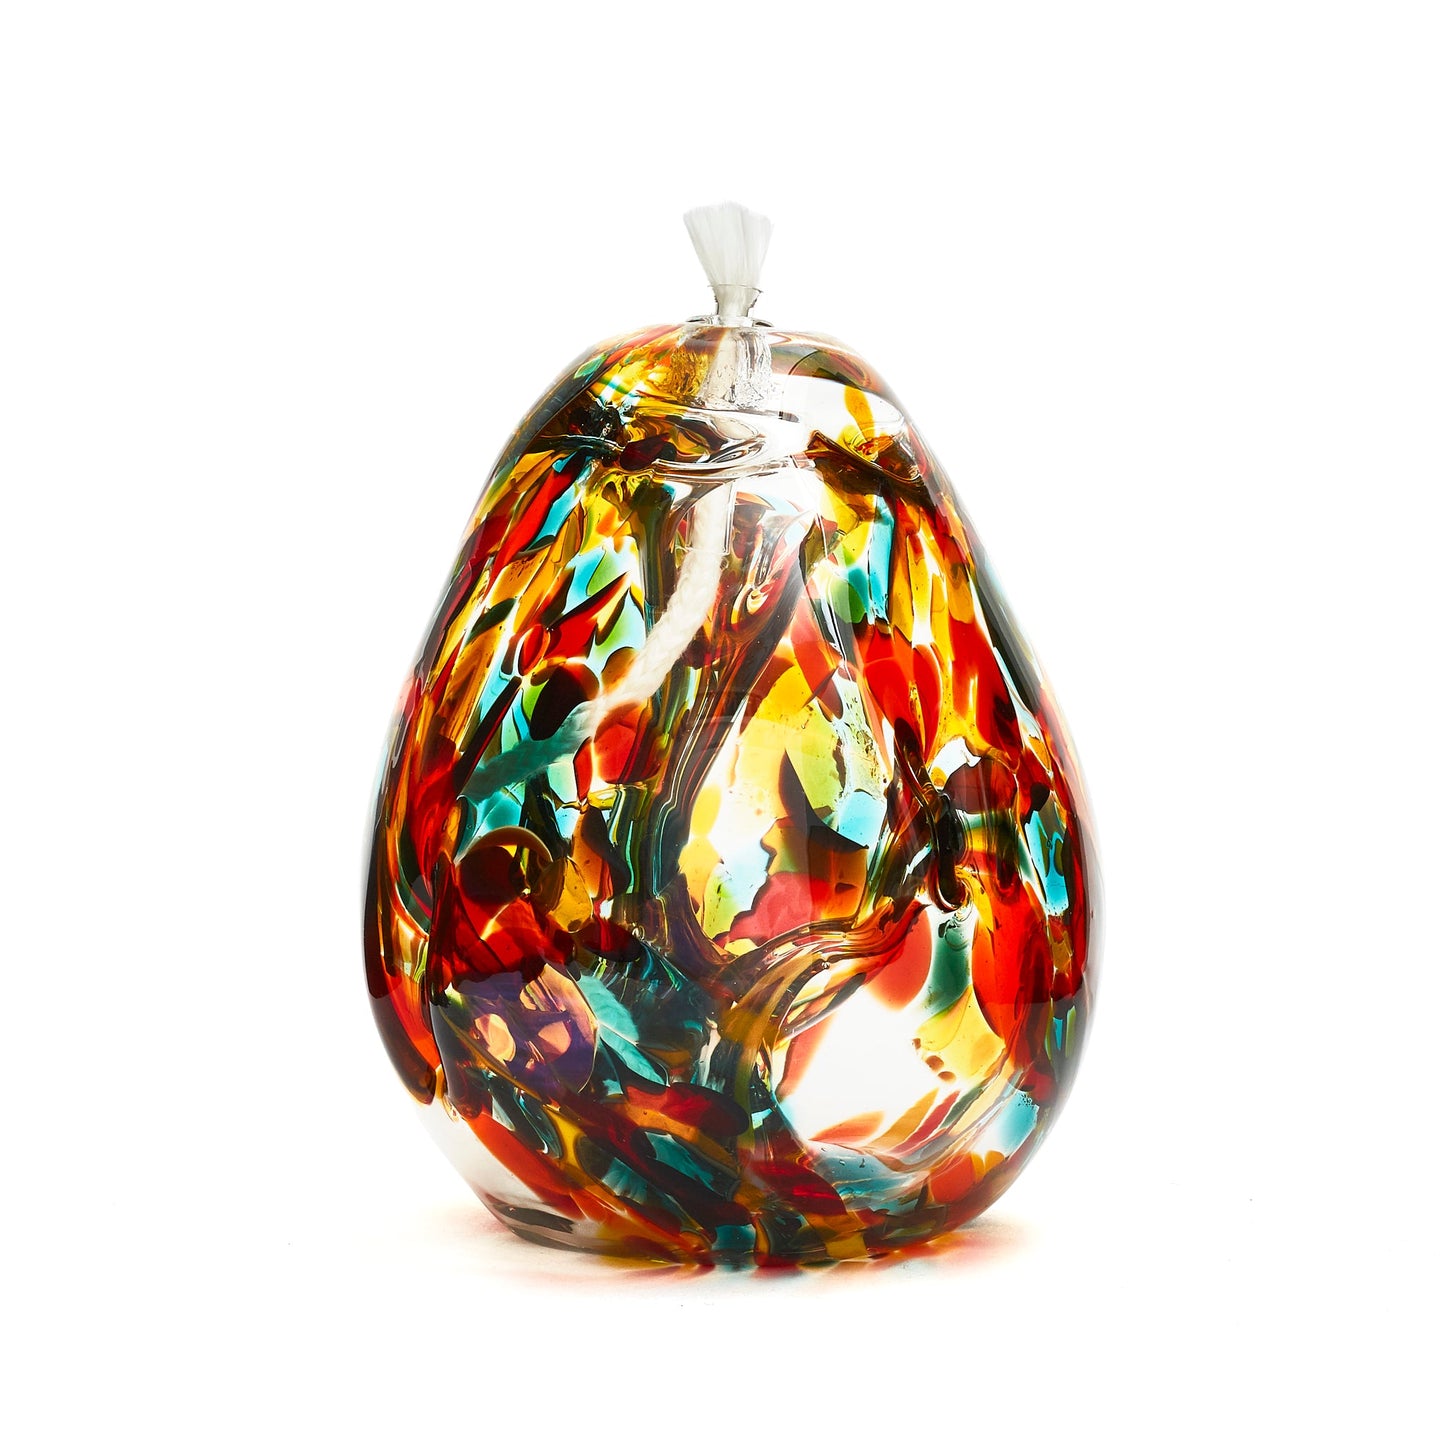 Handmade tall teardrop autumn glass oil lamp. Made in Ontario Canada by Gray Art Glass.